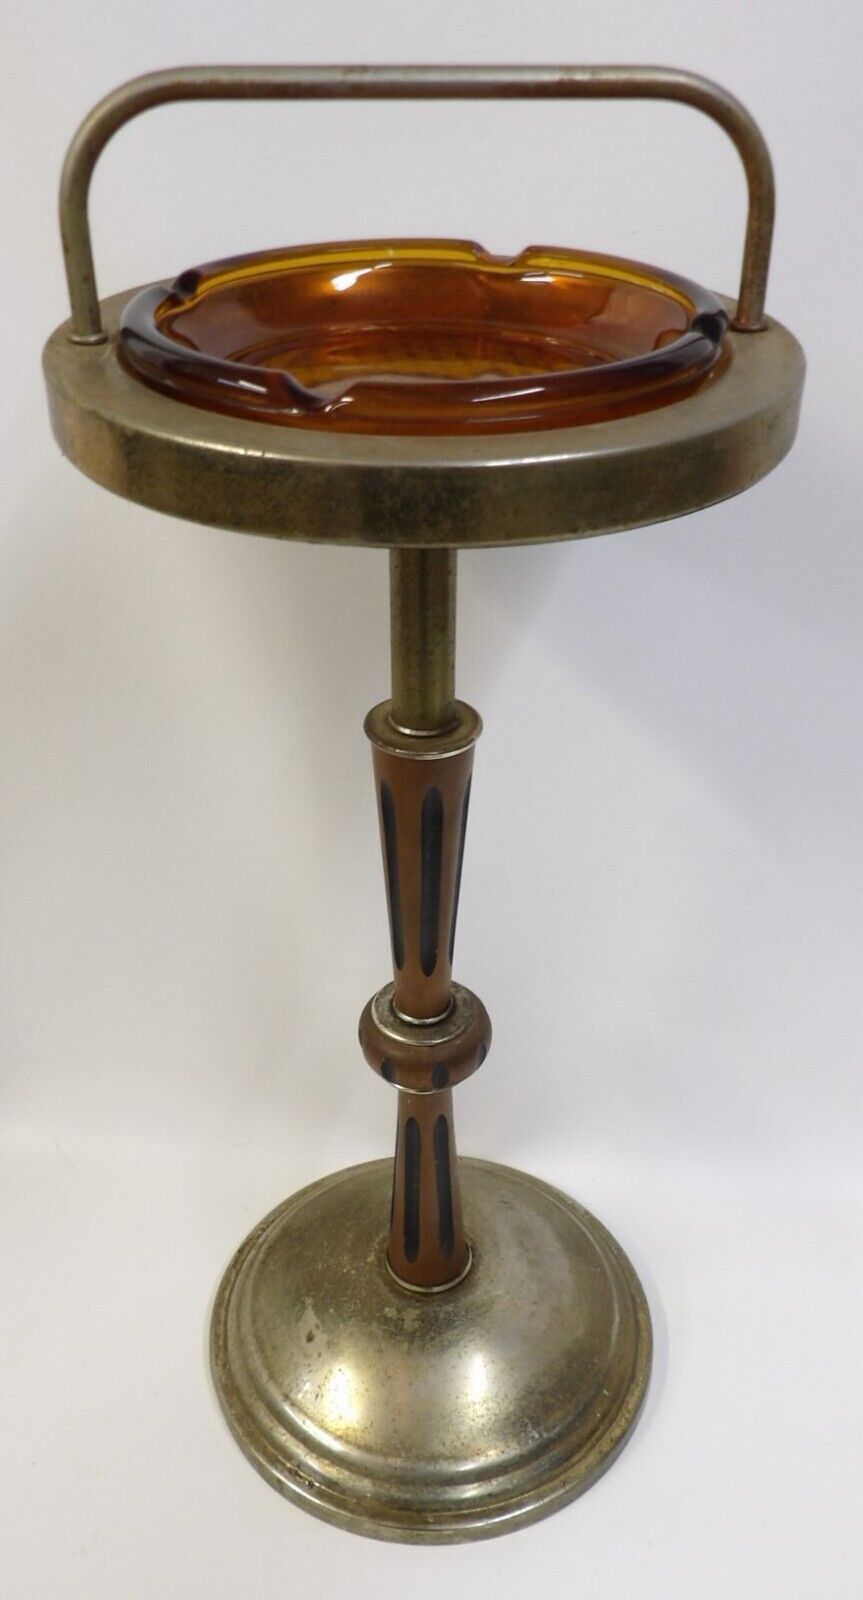 Vintage 60's/70's Metal Ashtray Smoking Stand with Amber Glass Insert